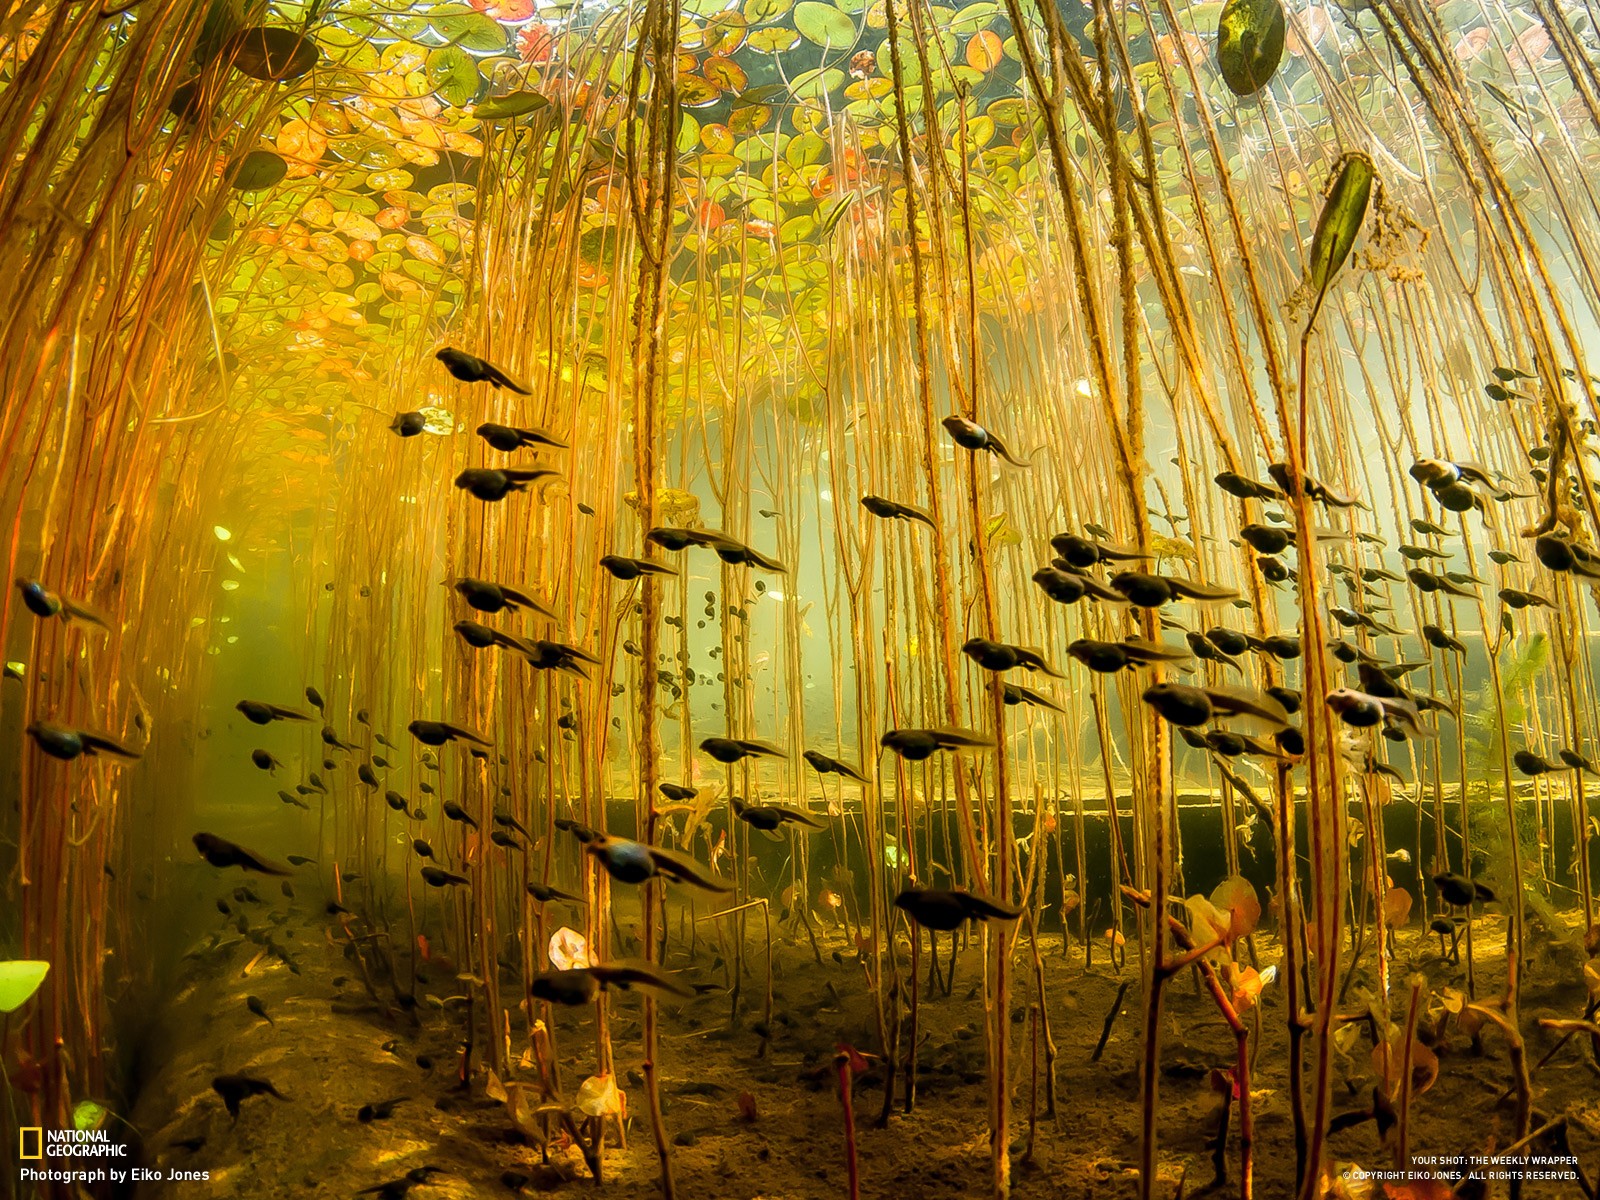 General 1600x1200 Tadpoles animals plants National Geographic